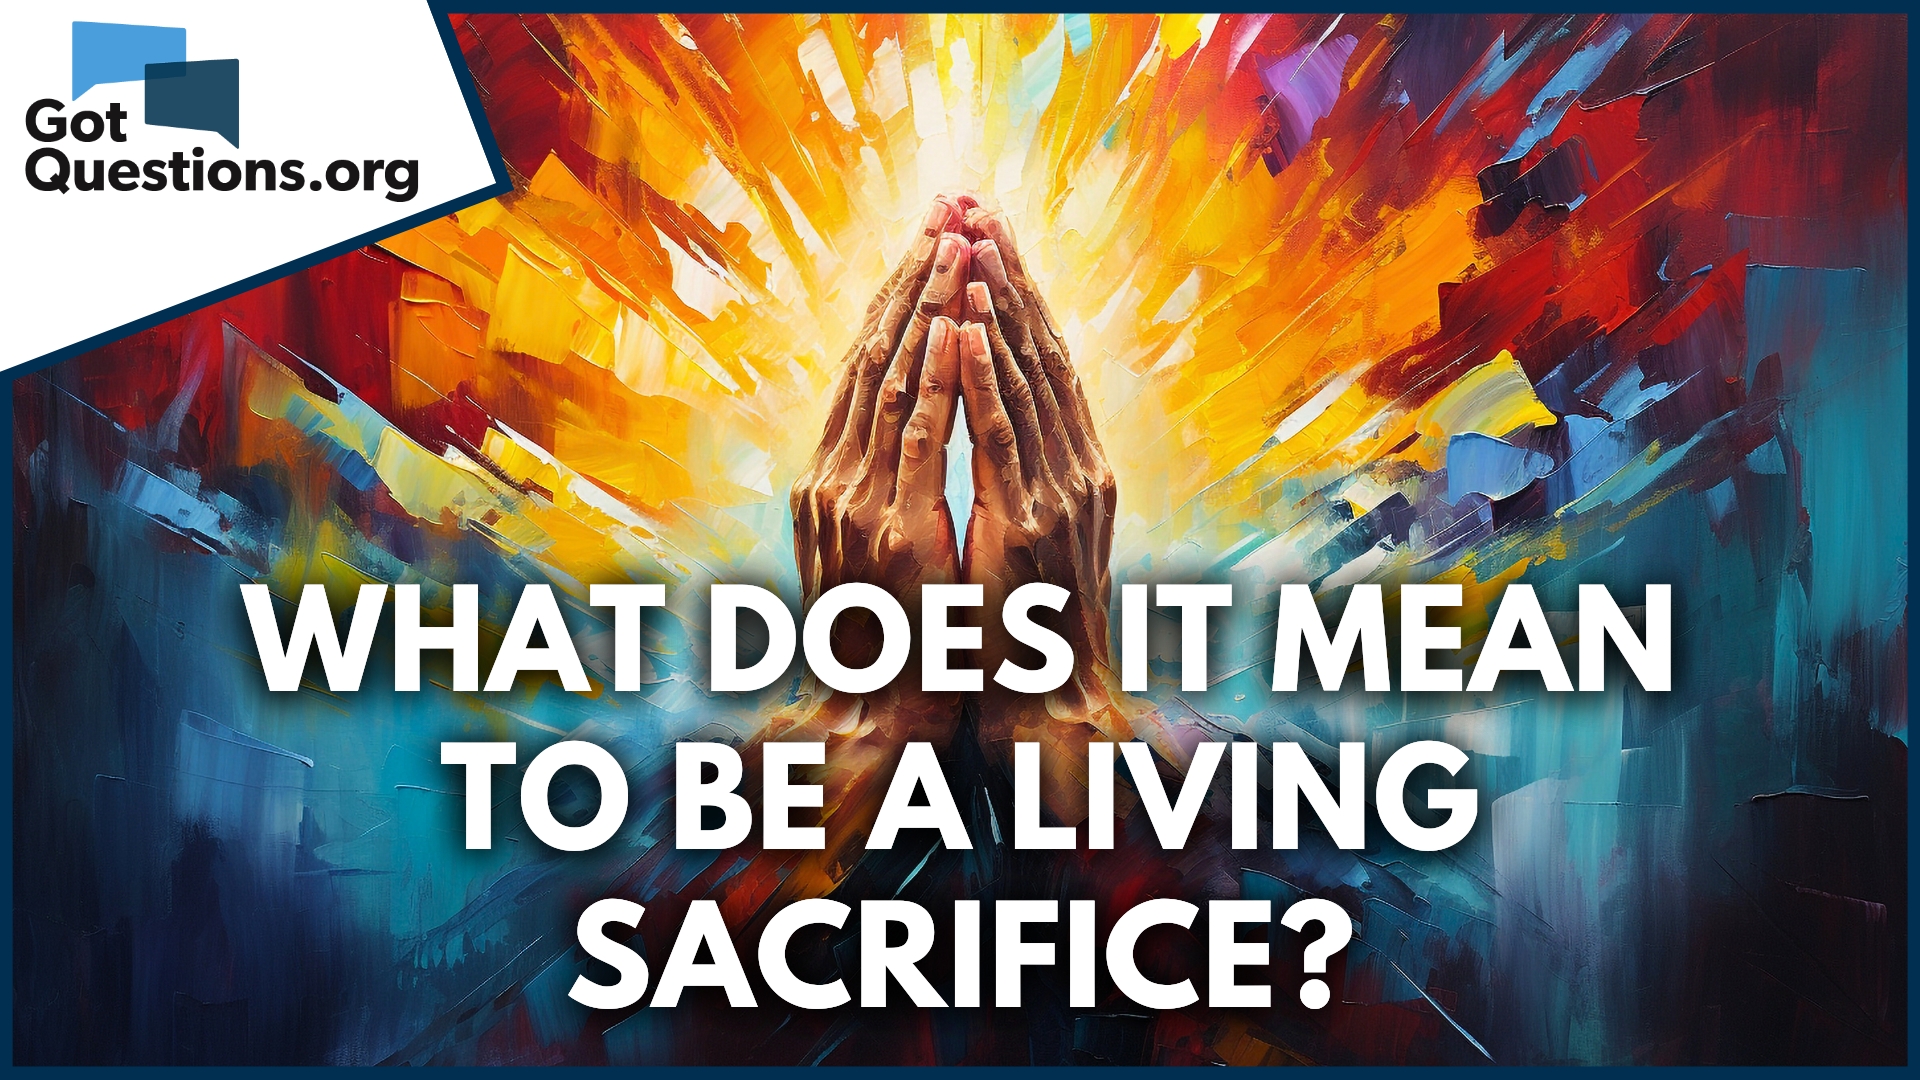 What does it mean to sacrifice